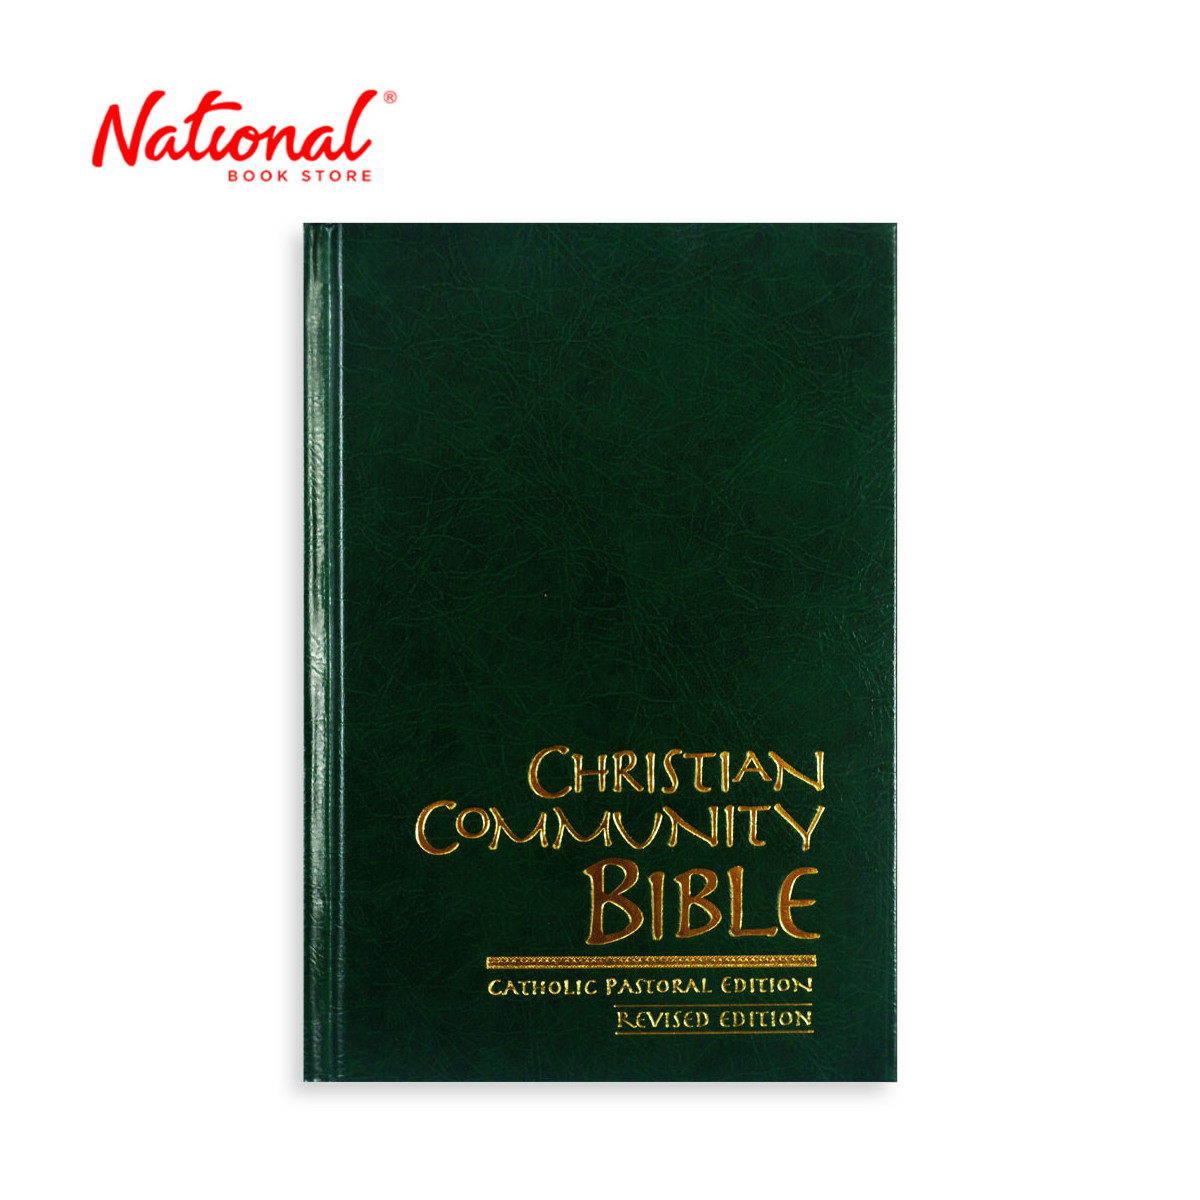 Christian Community Bible Popular New Edition Indexed - Hardcover - Religion & Spirituality